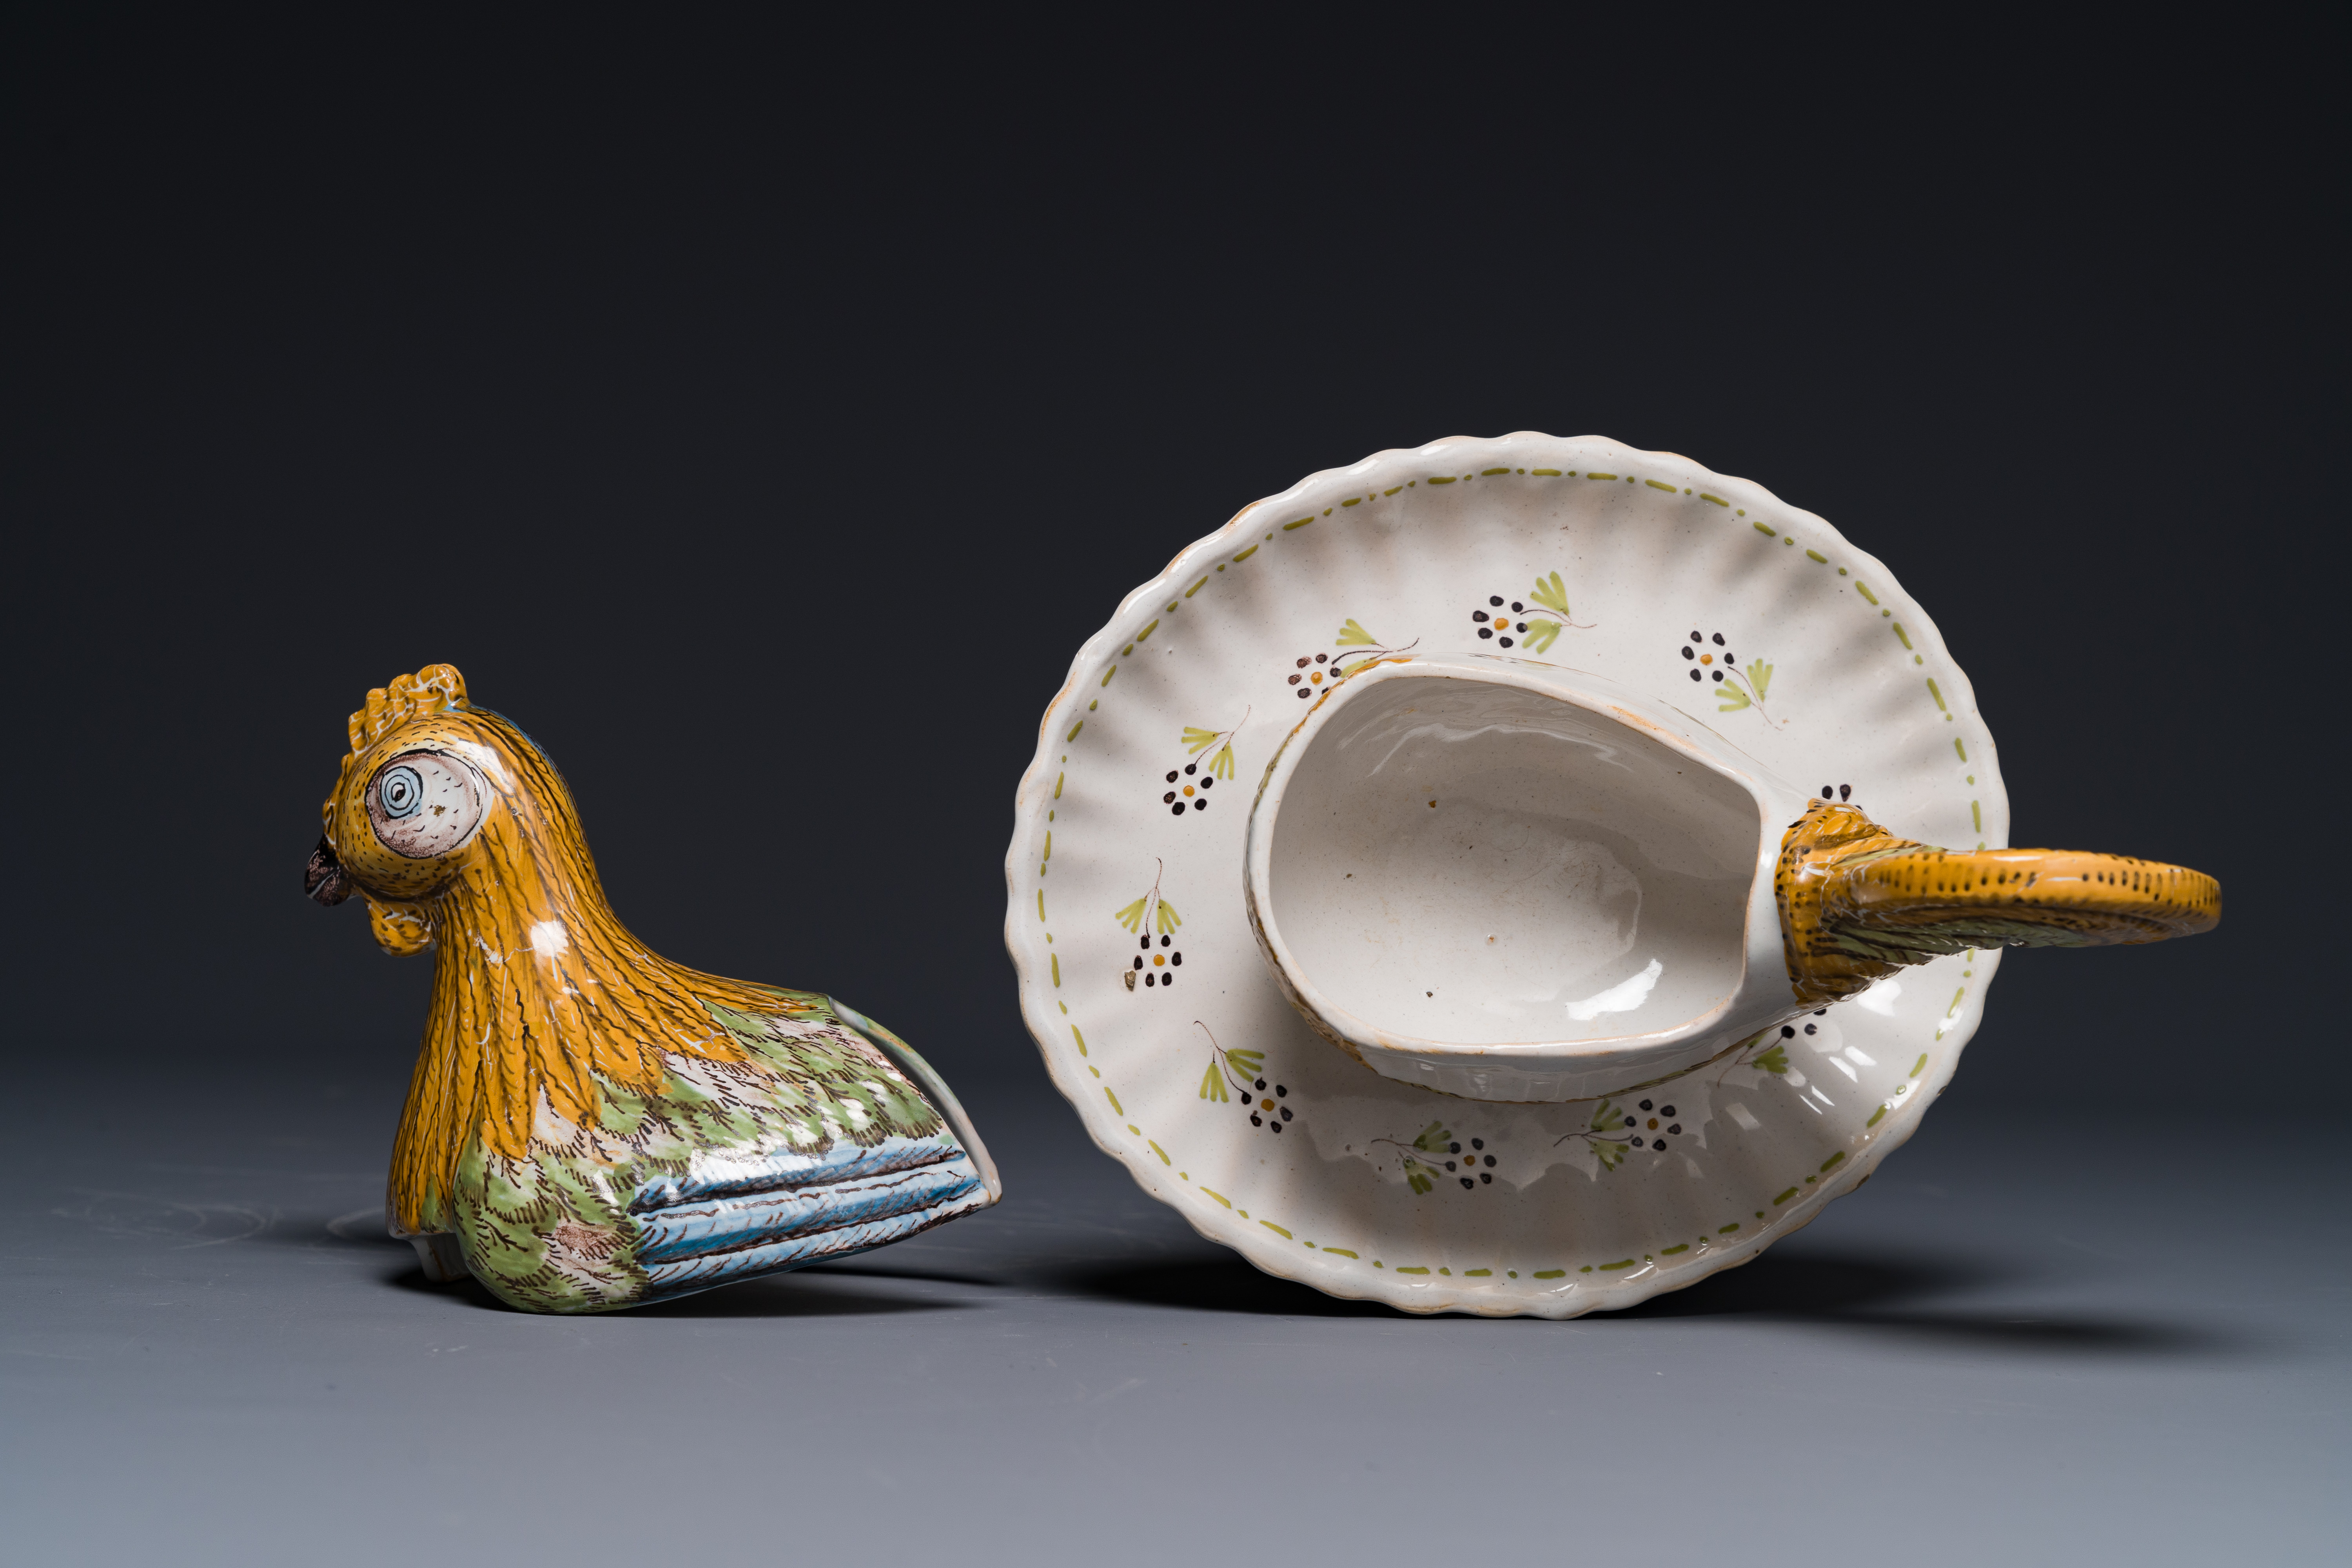 A German polychrome faience rooster-shaped tureen and cover, Abtsbessingen, 18th C. - Image 6 of 13